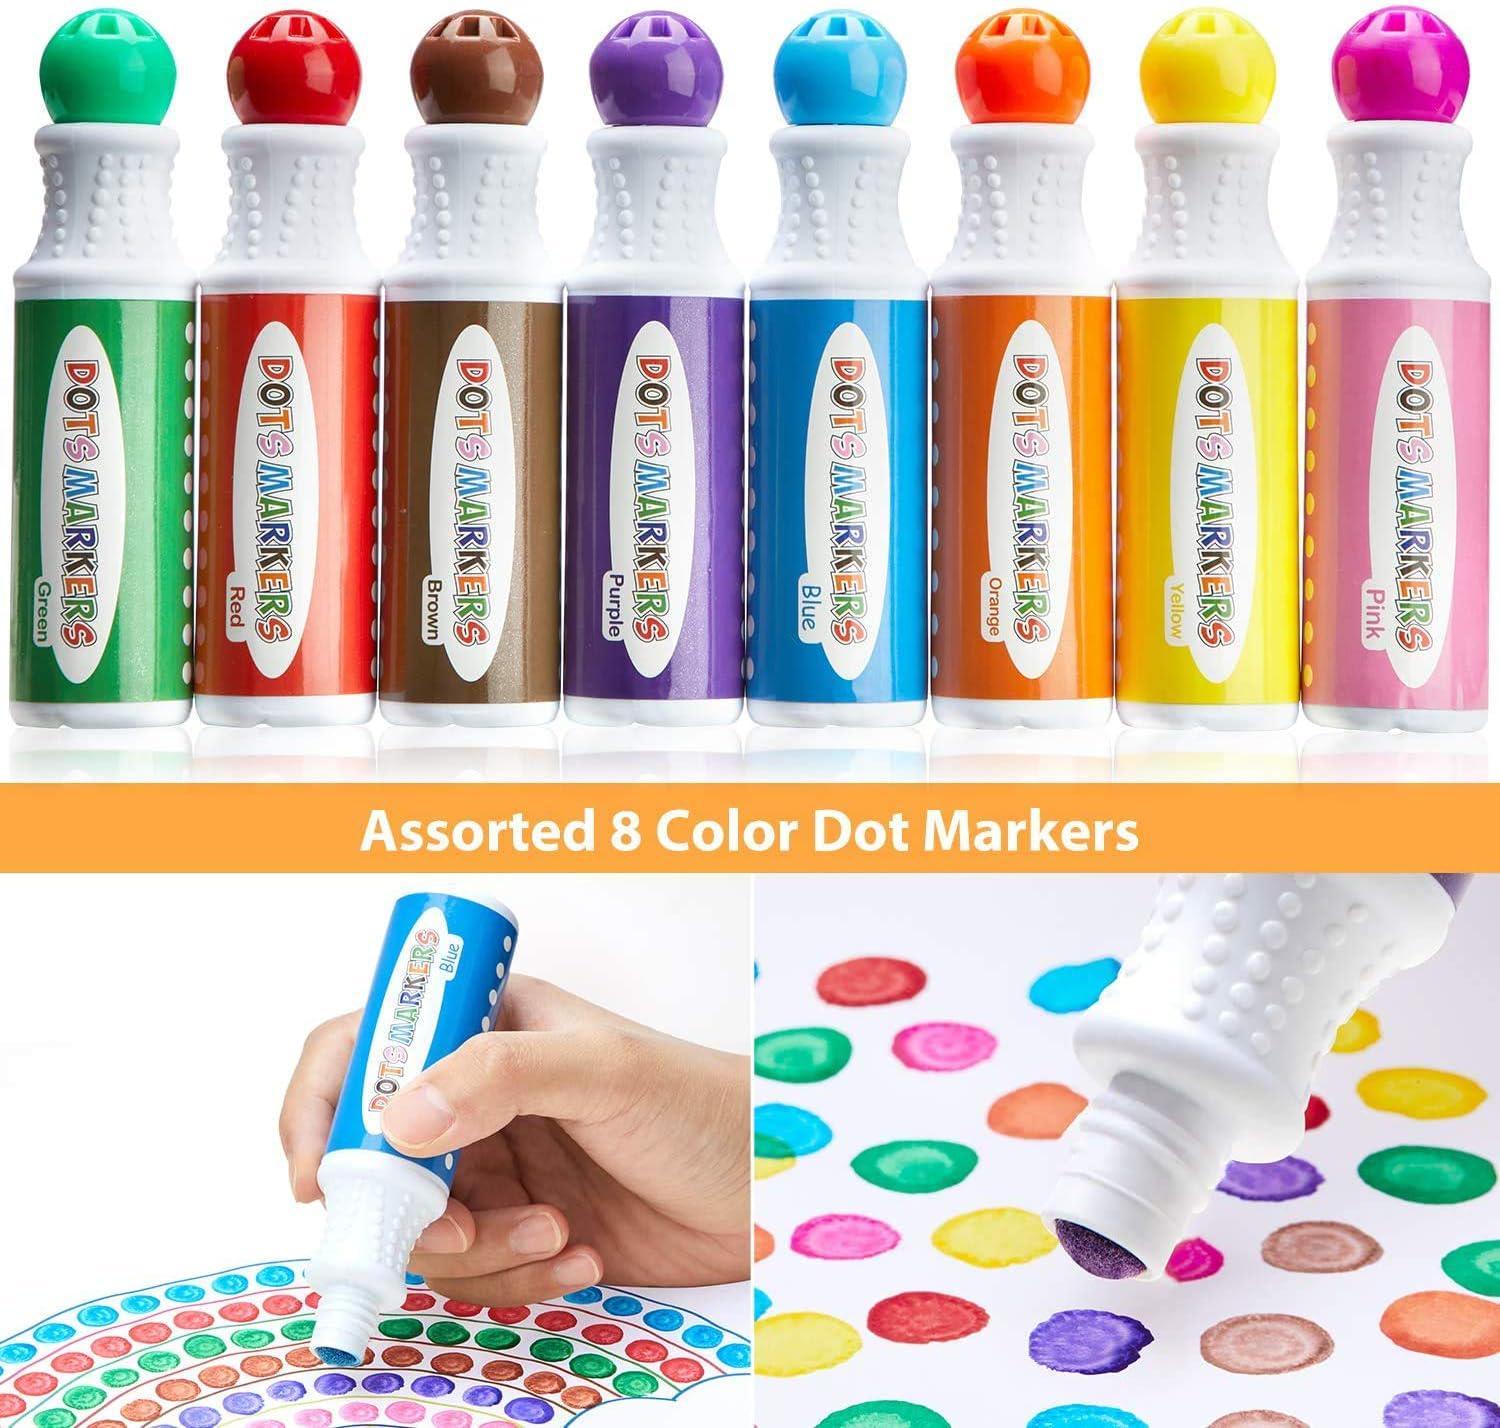  Ultimate Stationery Dot Markers